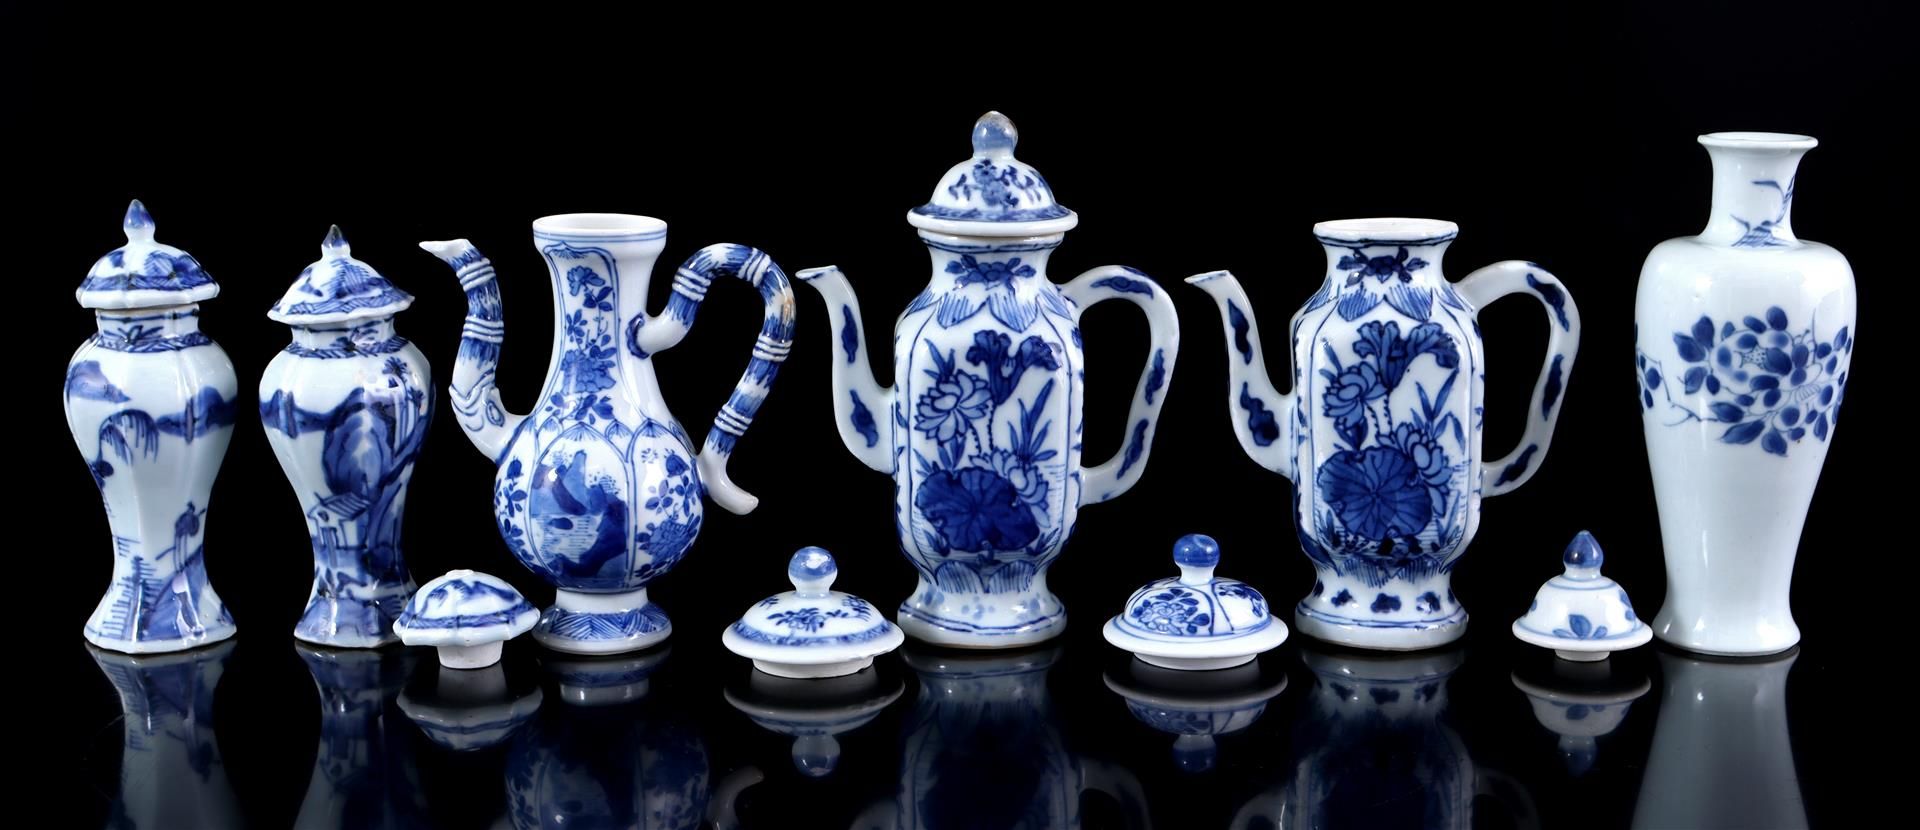 Porcelain miniature jugs, lidded pots and loose lids, China 18th/19th century - Image 4 of 6